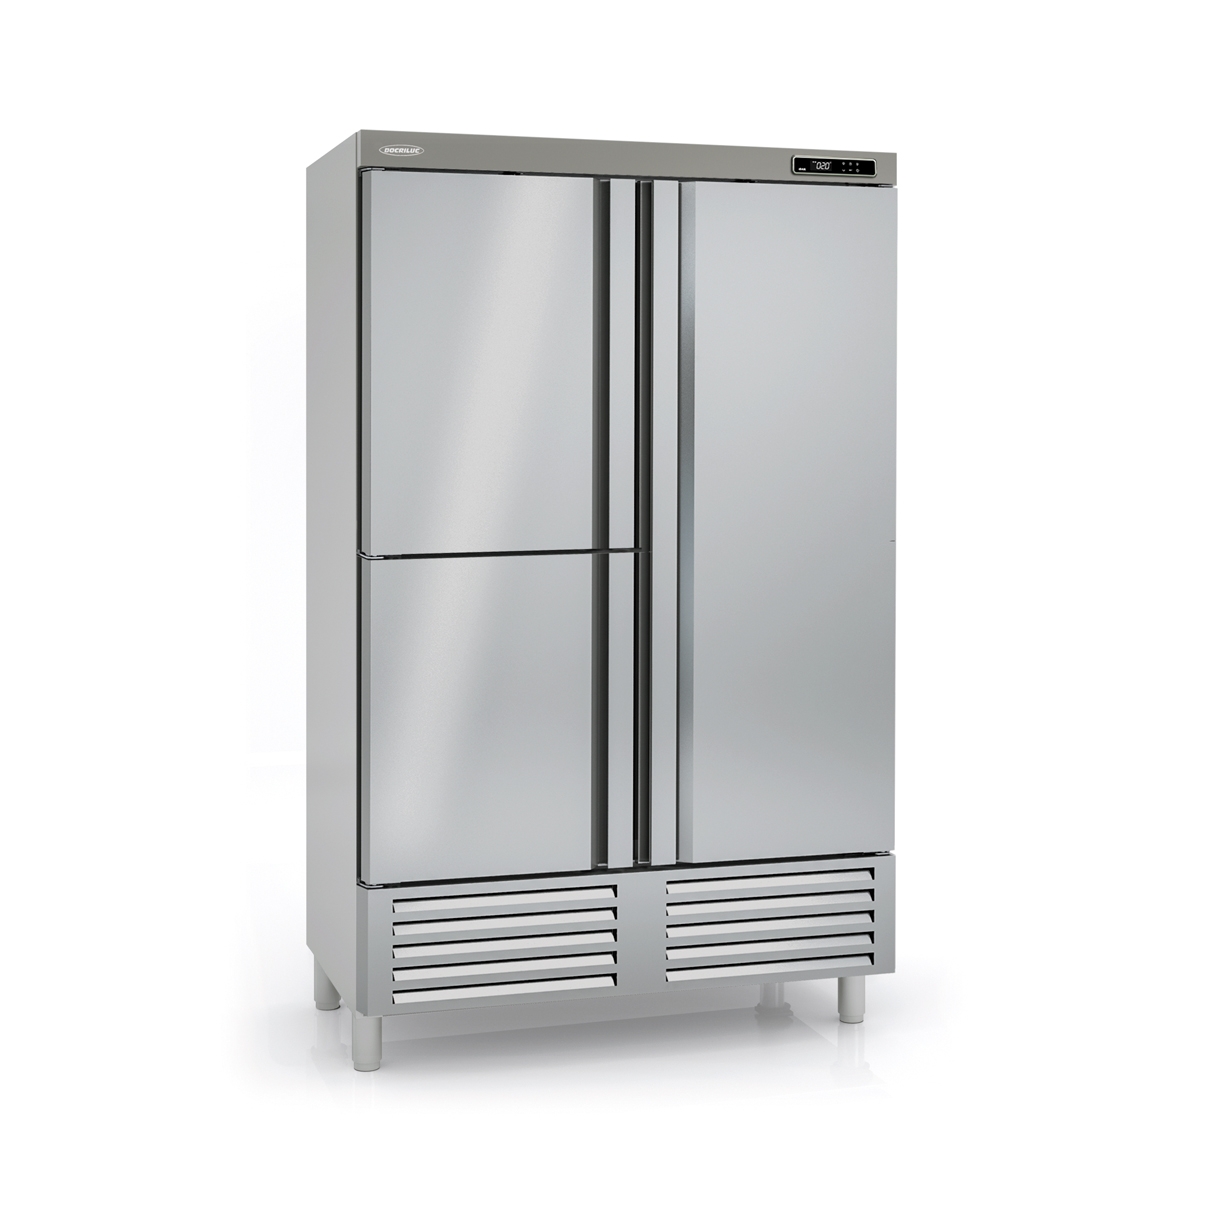 Snack Refrigerated Cabinet AR-125-3